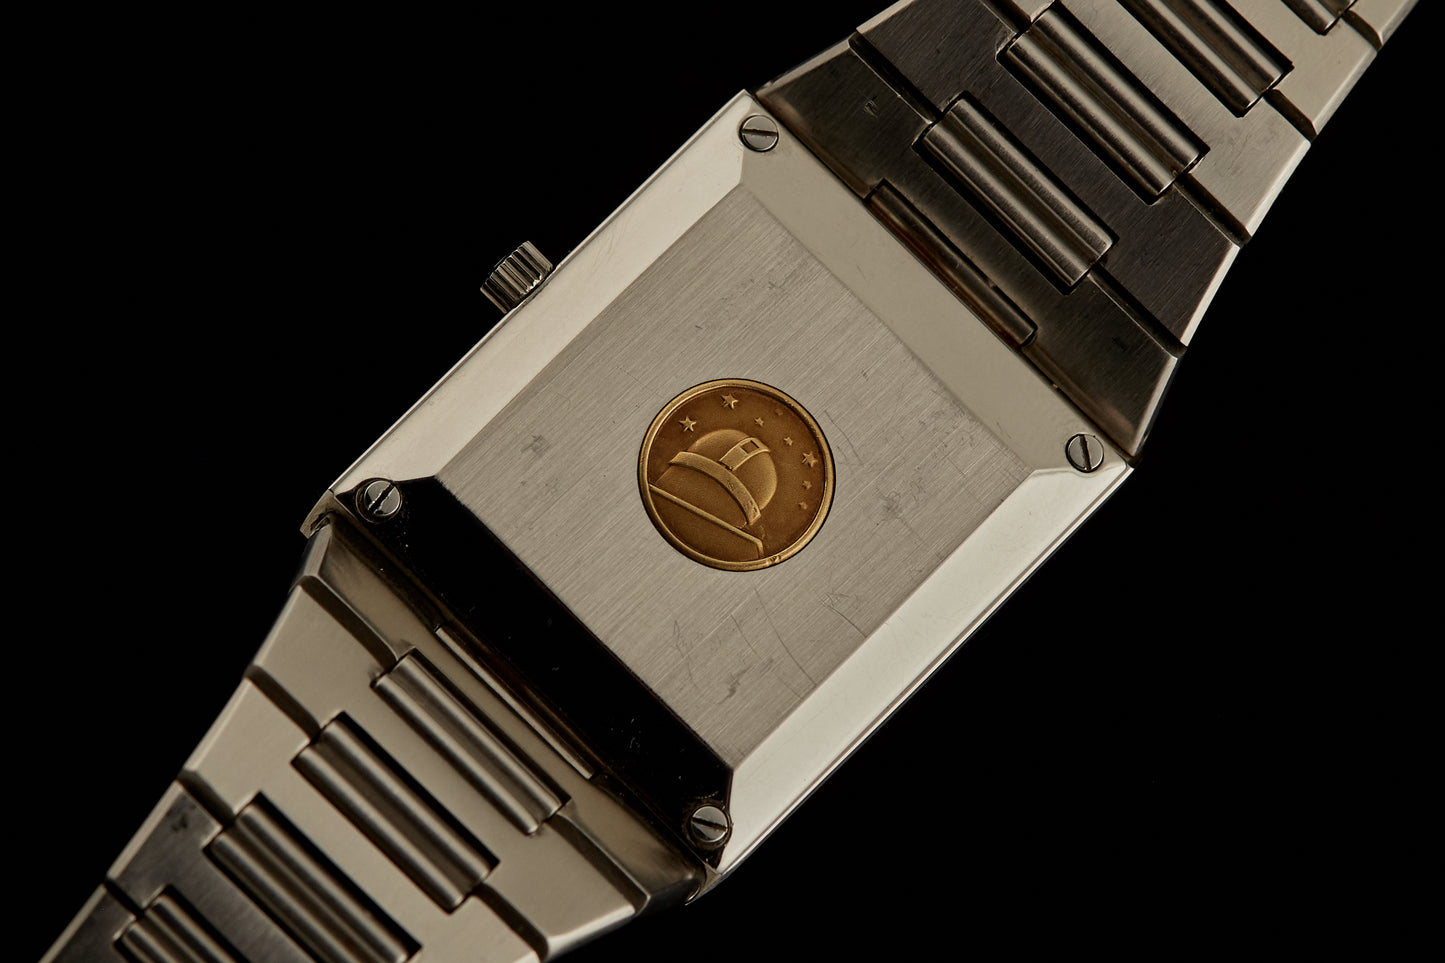 Omega Constellation Automatic Ultra-Thin